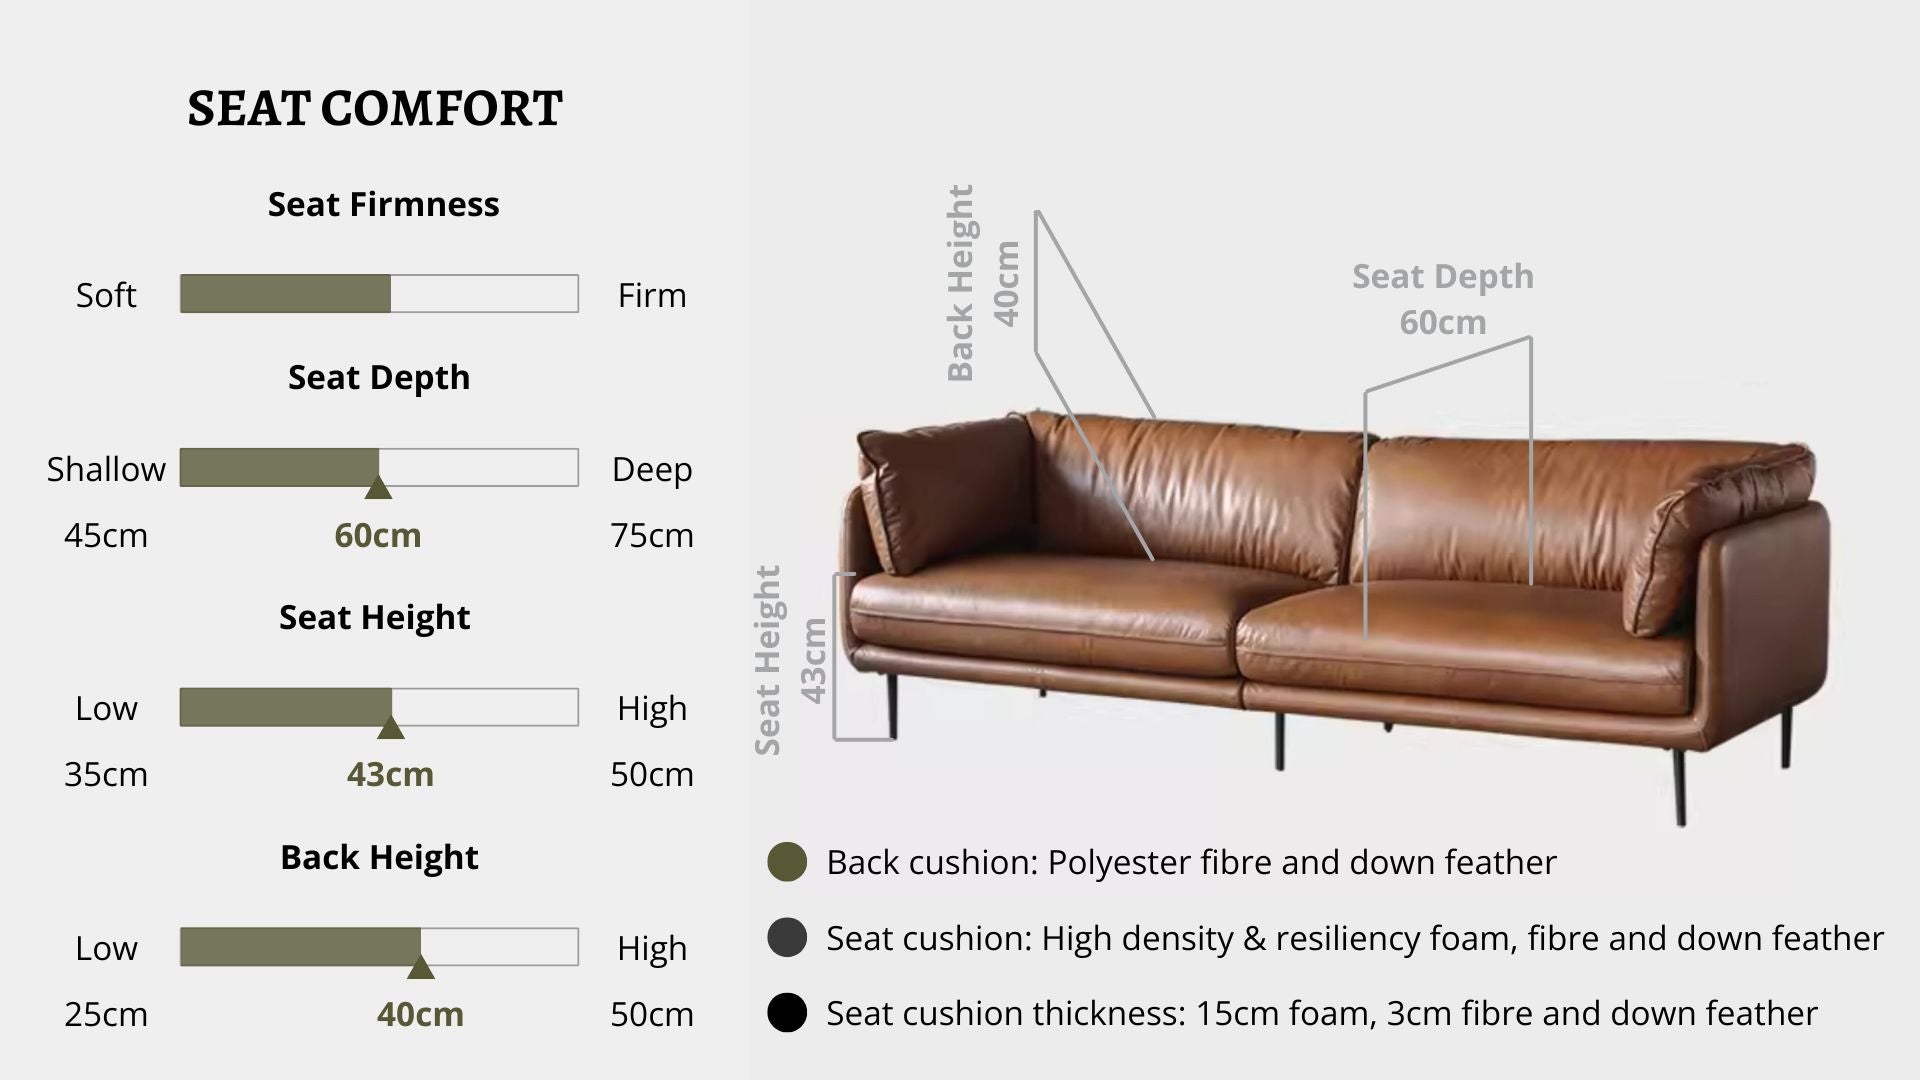 Details the key information pertaining to seat comfort such as seat firmness, seat depth, seat height, back height, cushion thickness and material used for cushions